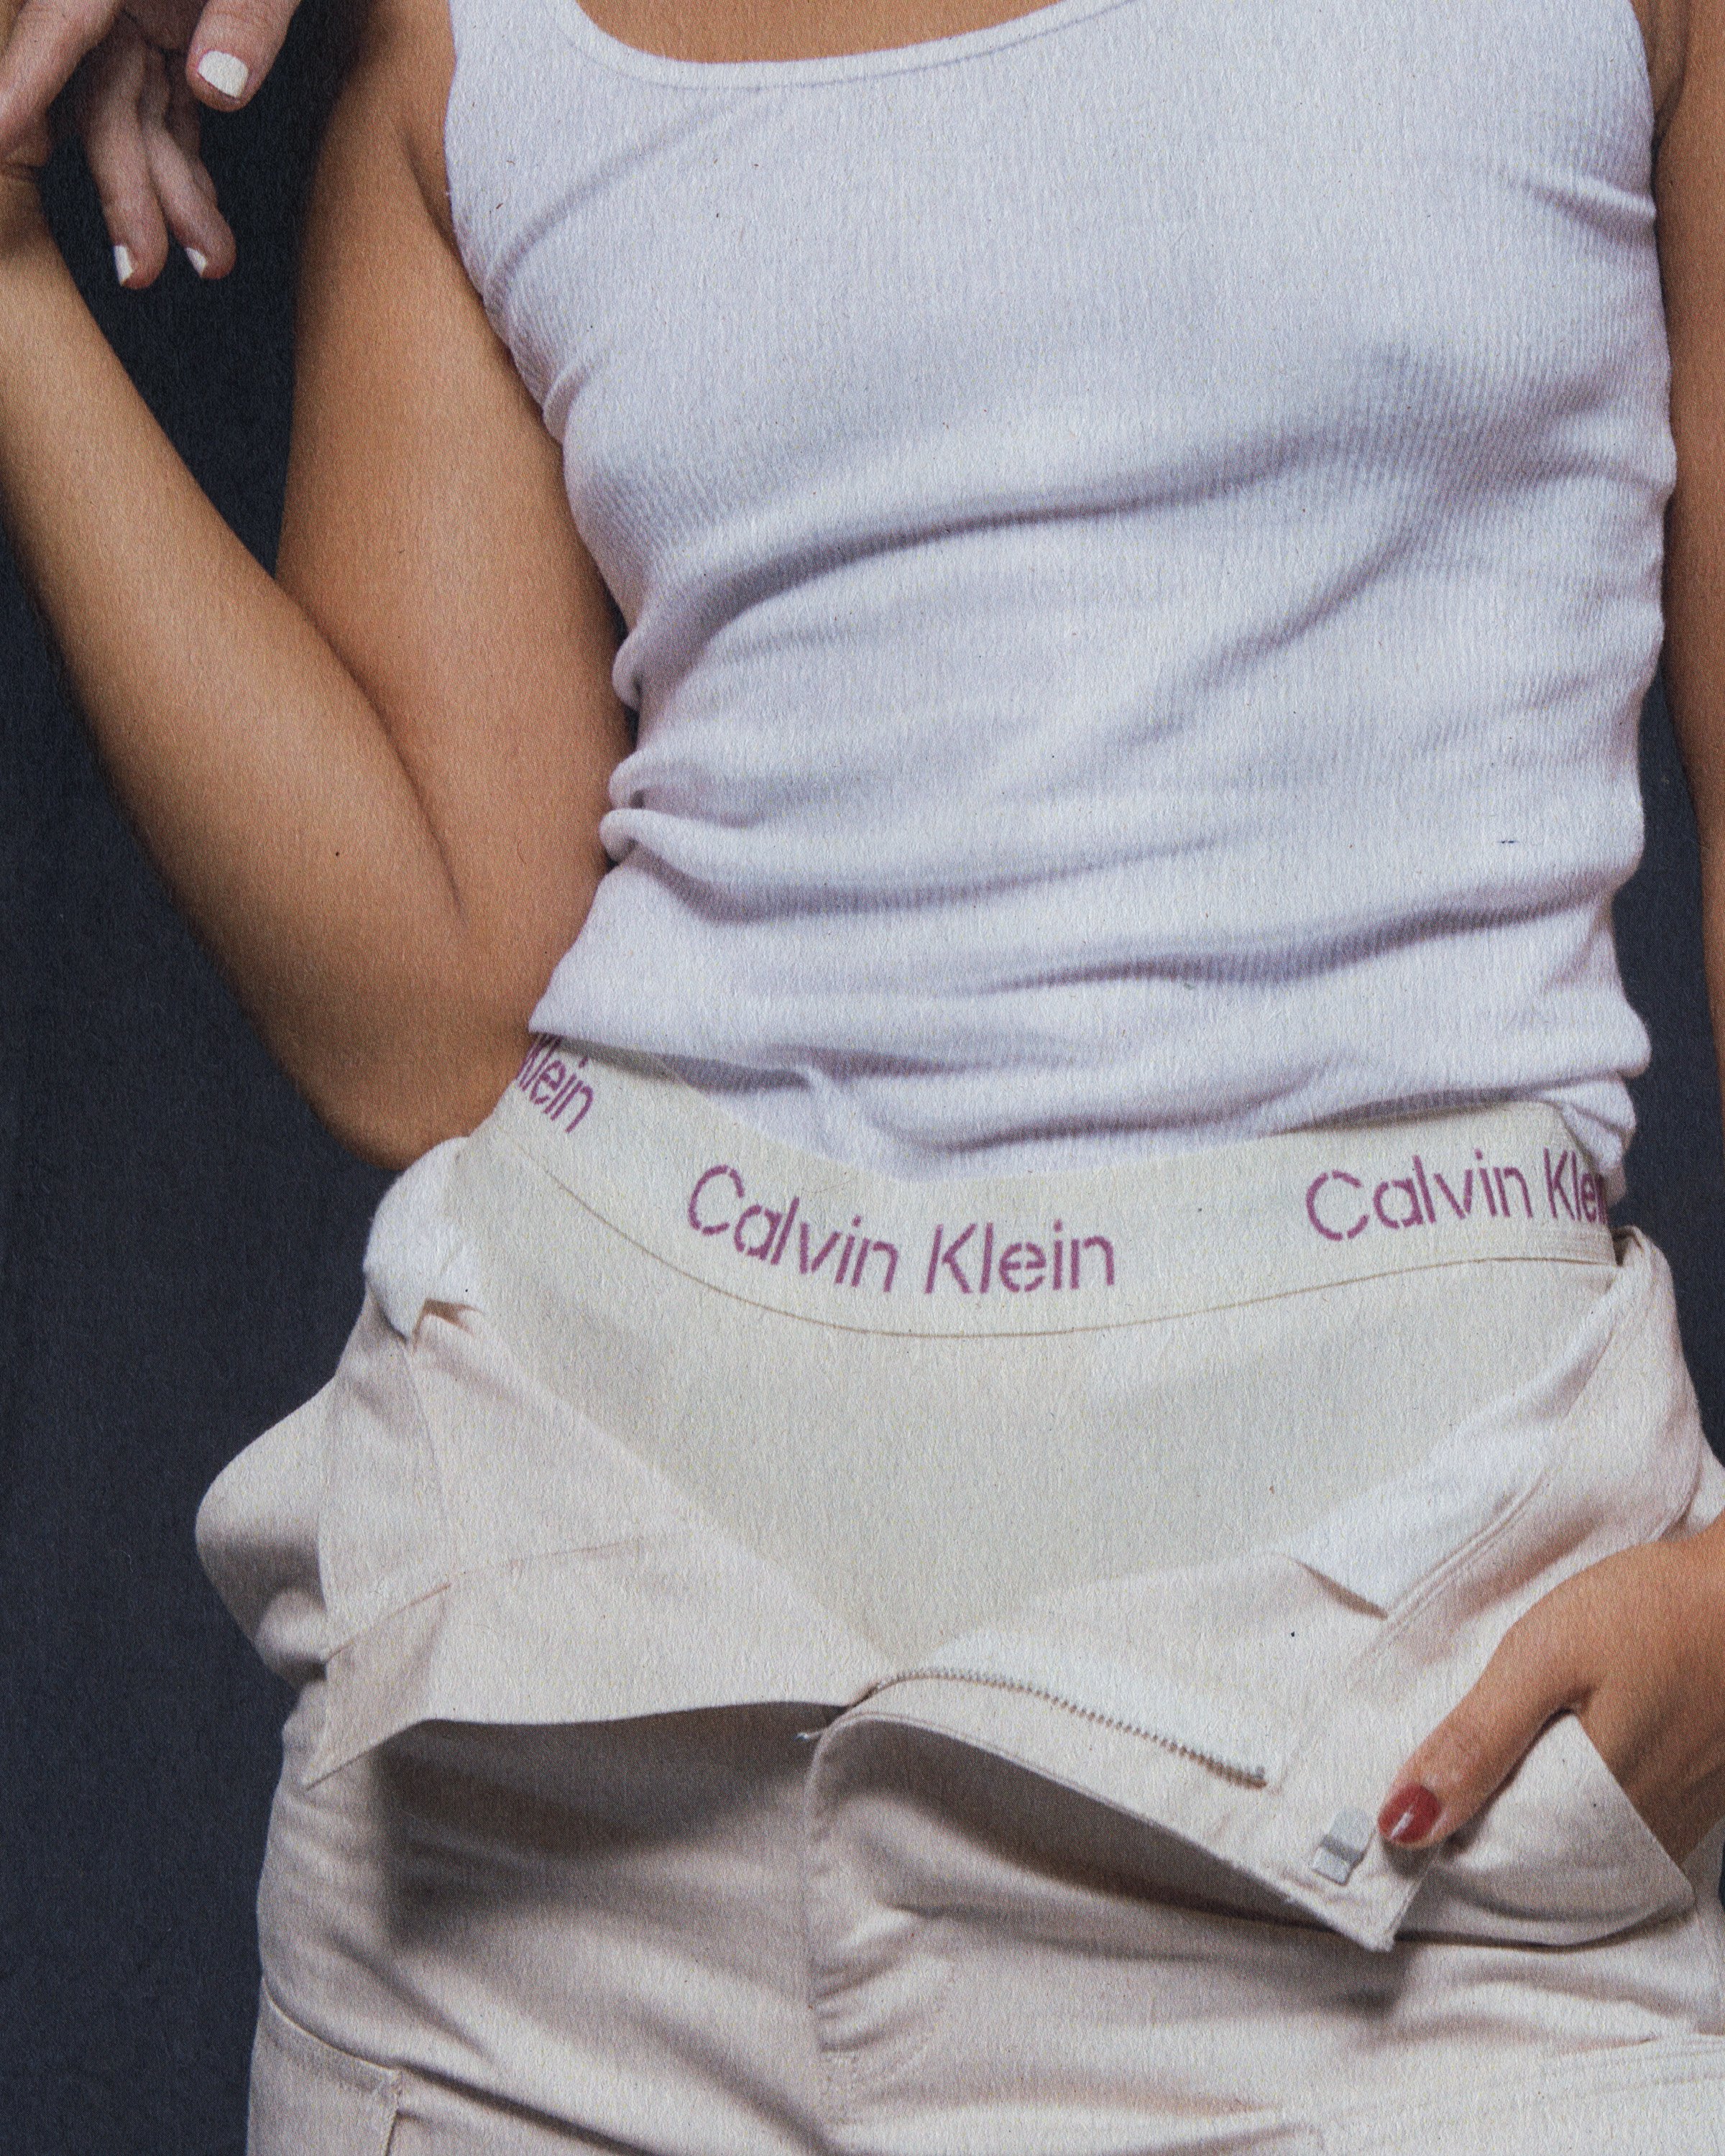 What do you think of the new Calvin Klein models? Have we come a long way?  : r/Millennials